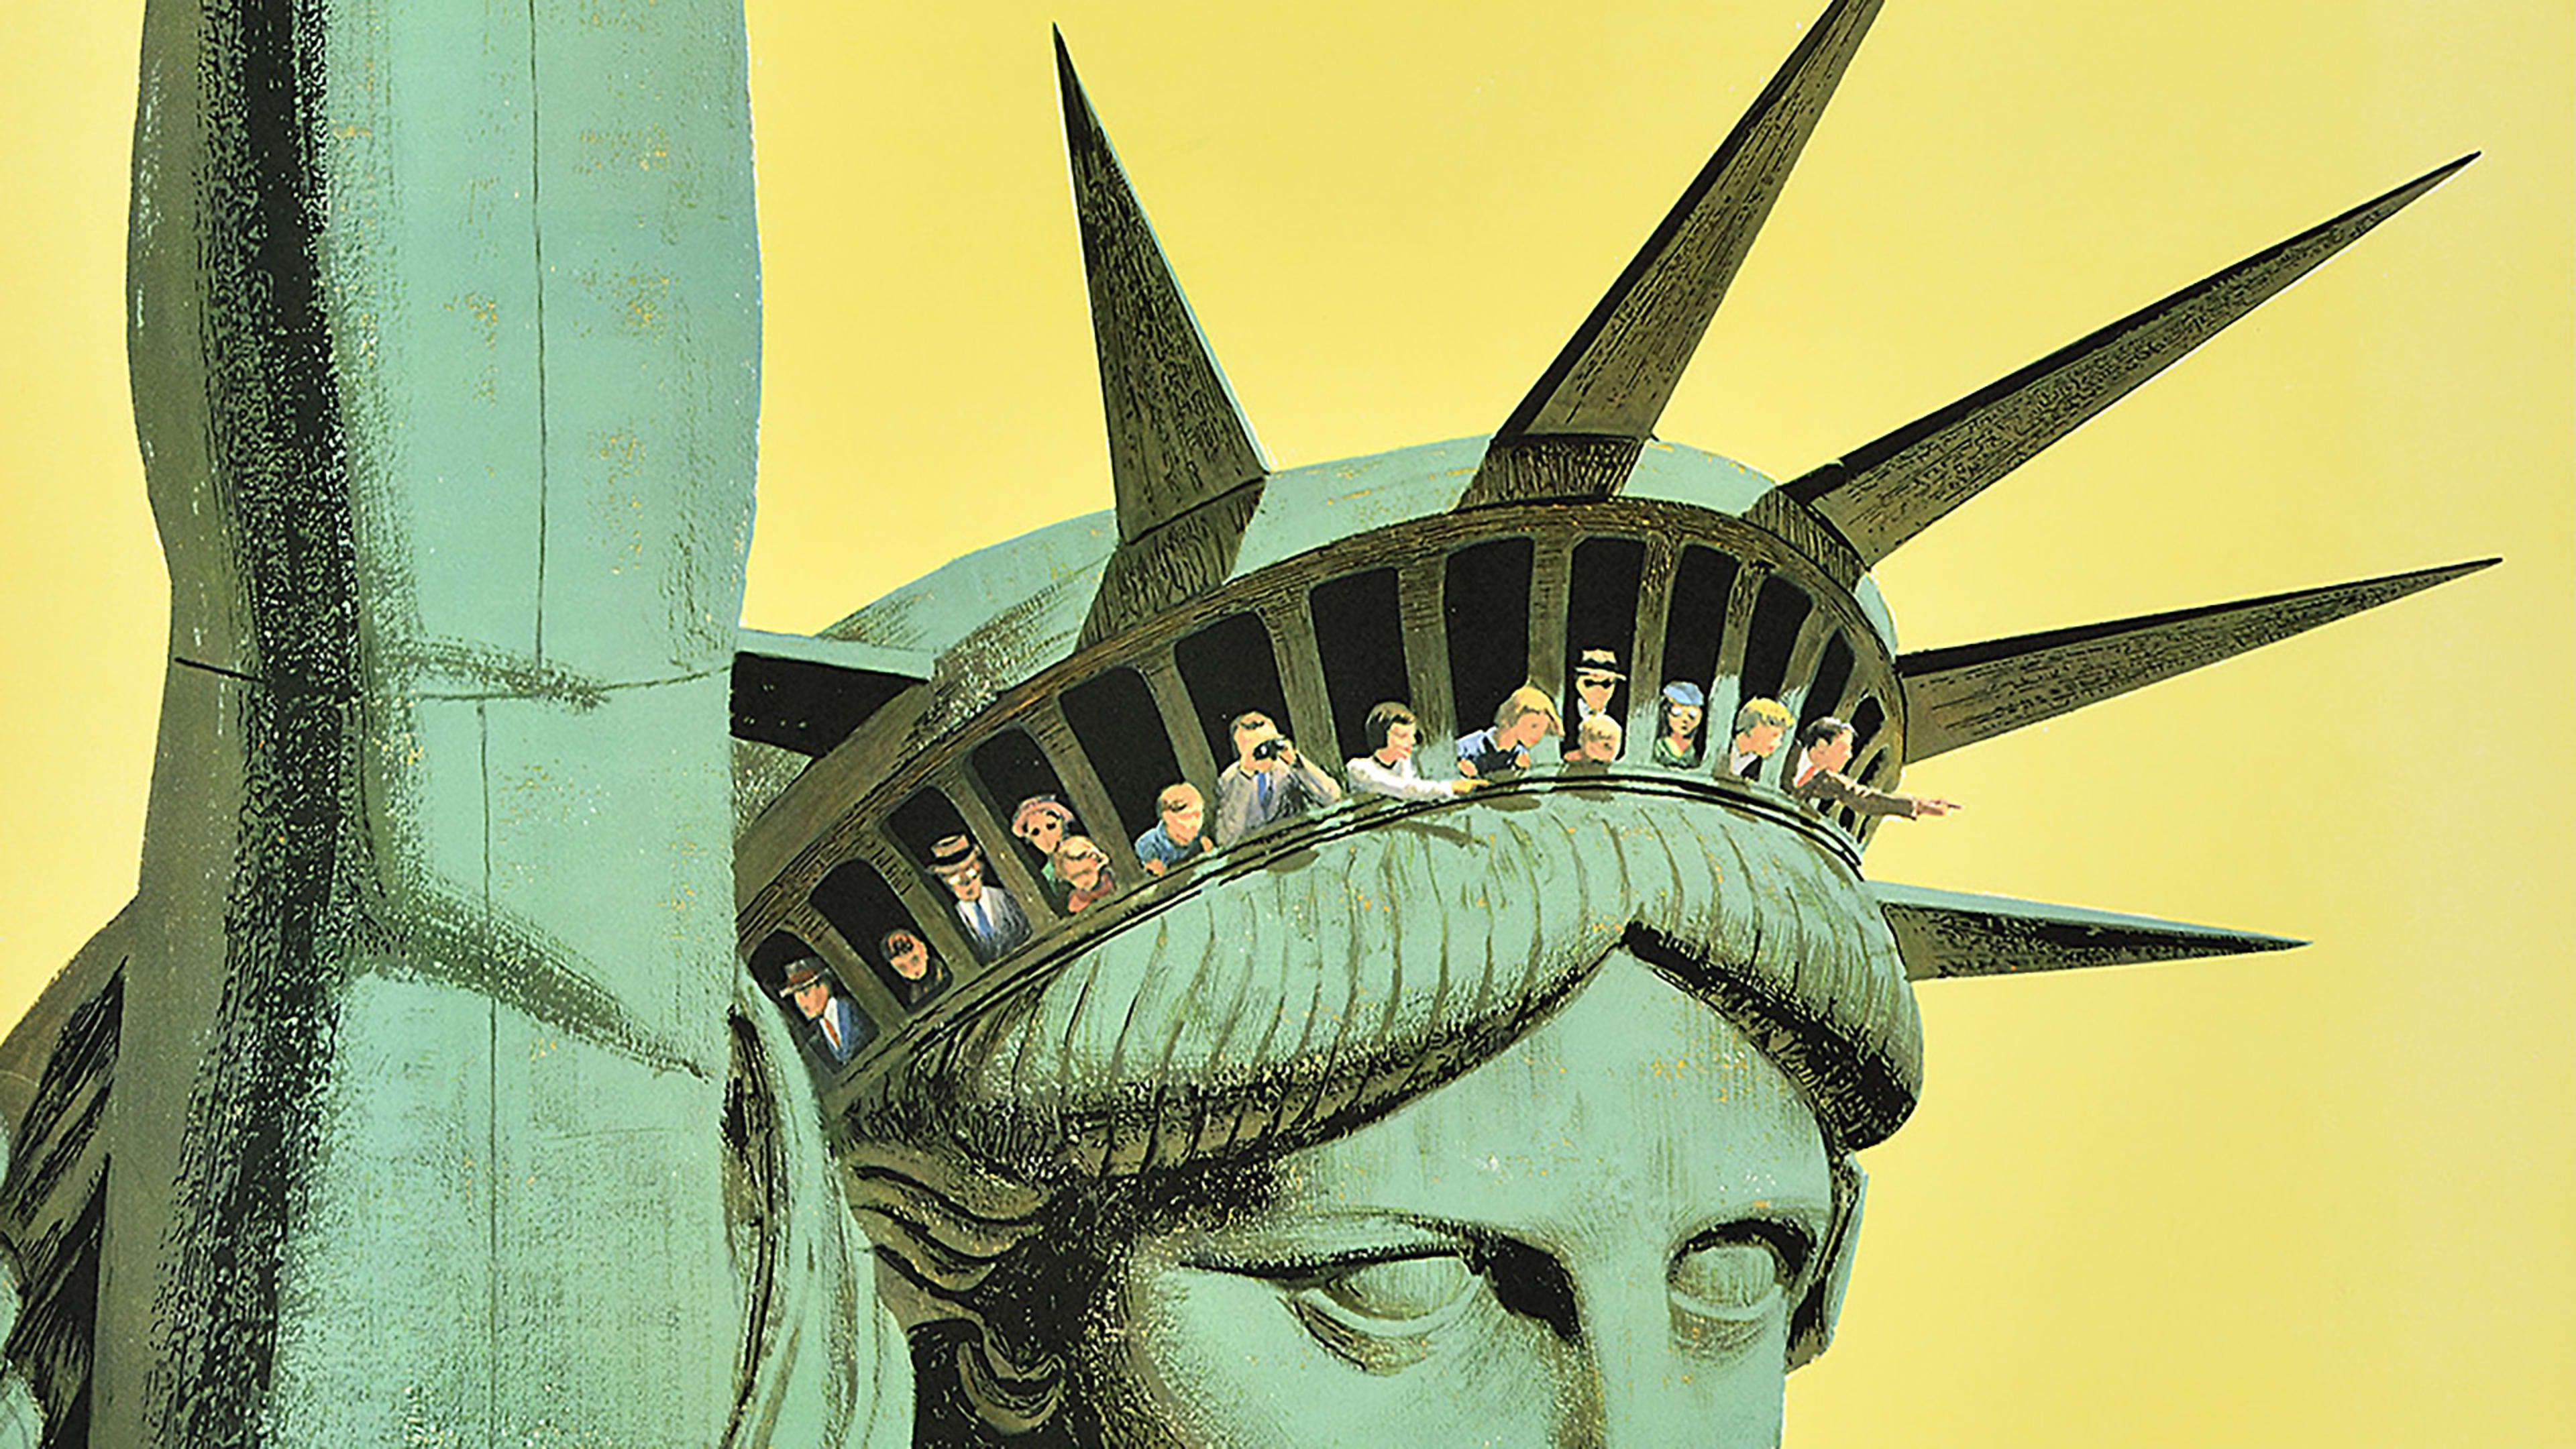 New York City wasn’t always a tourist trap. These posters prove it